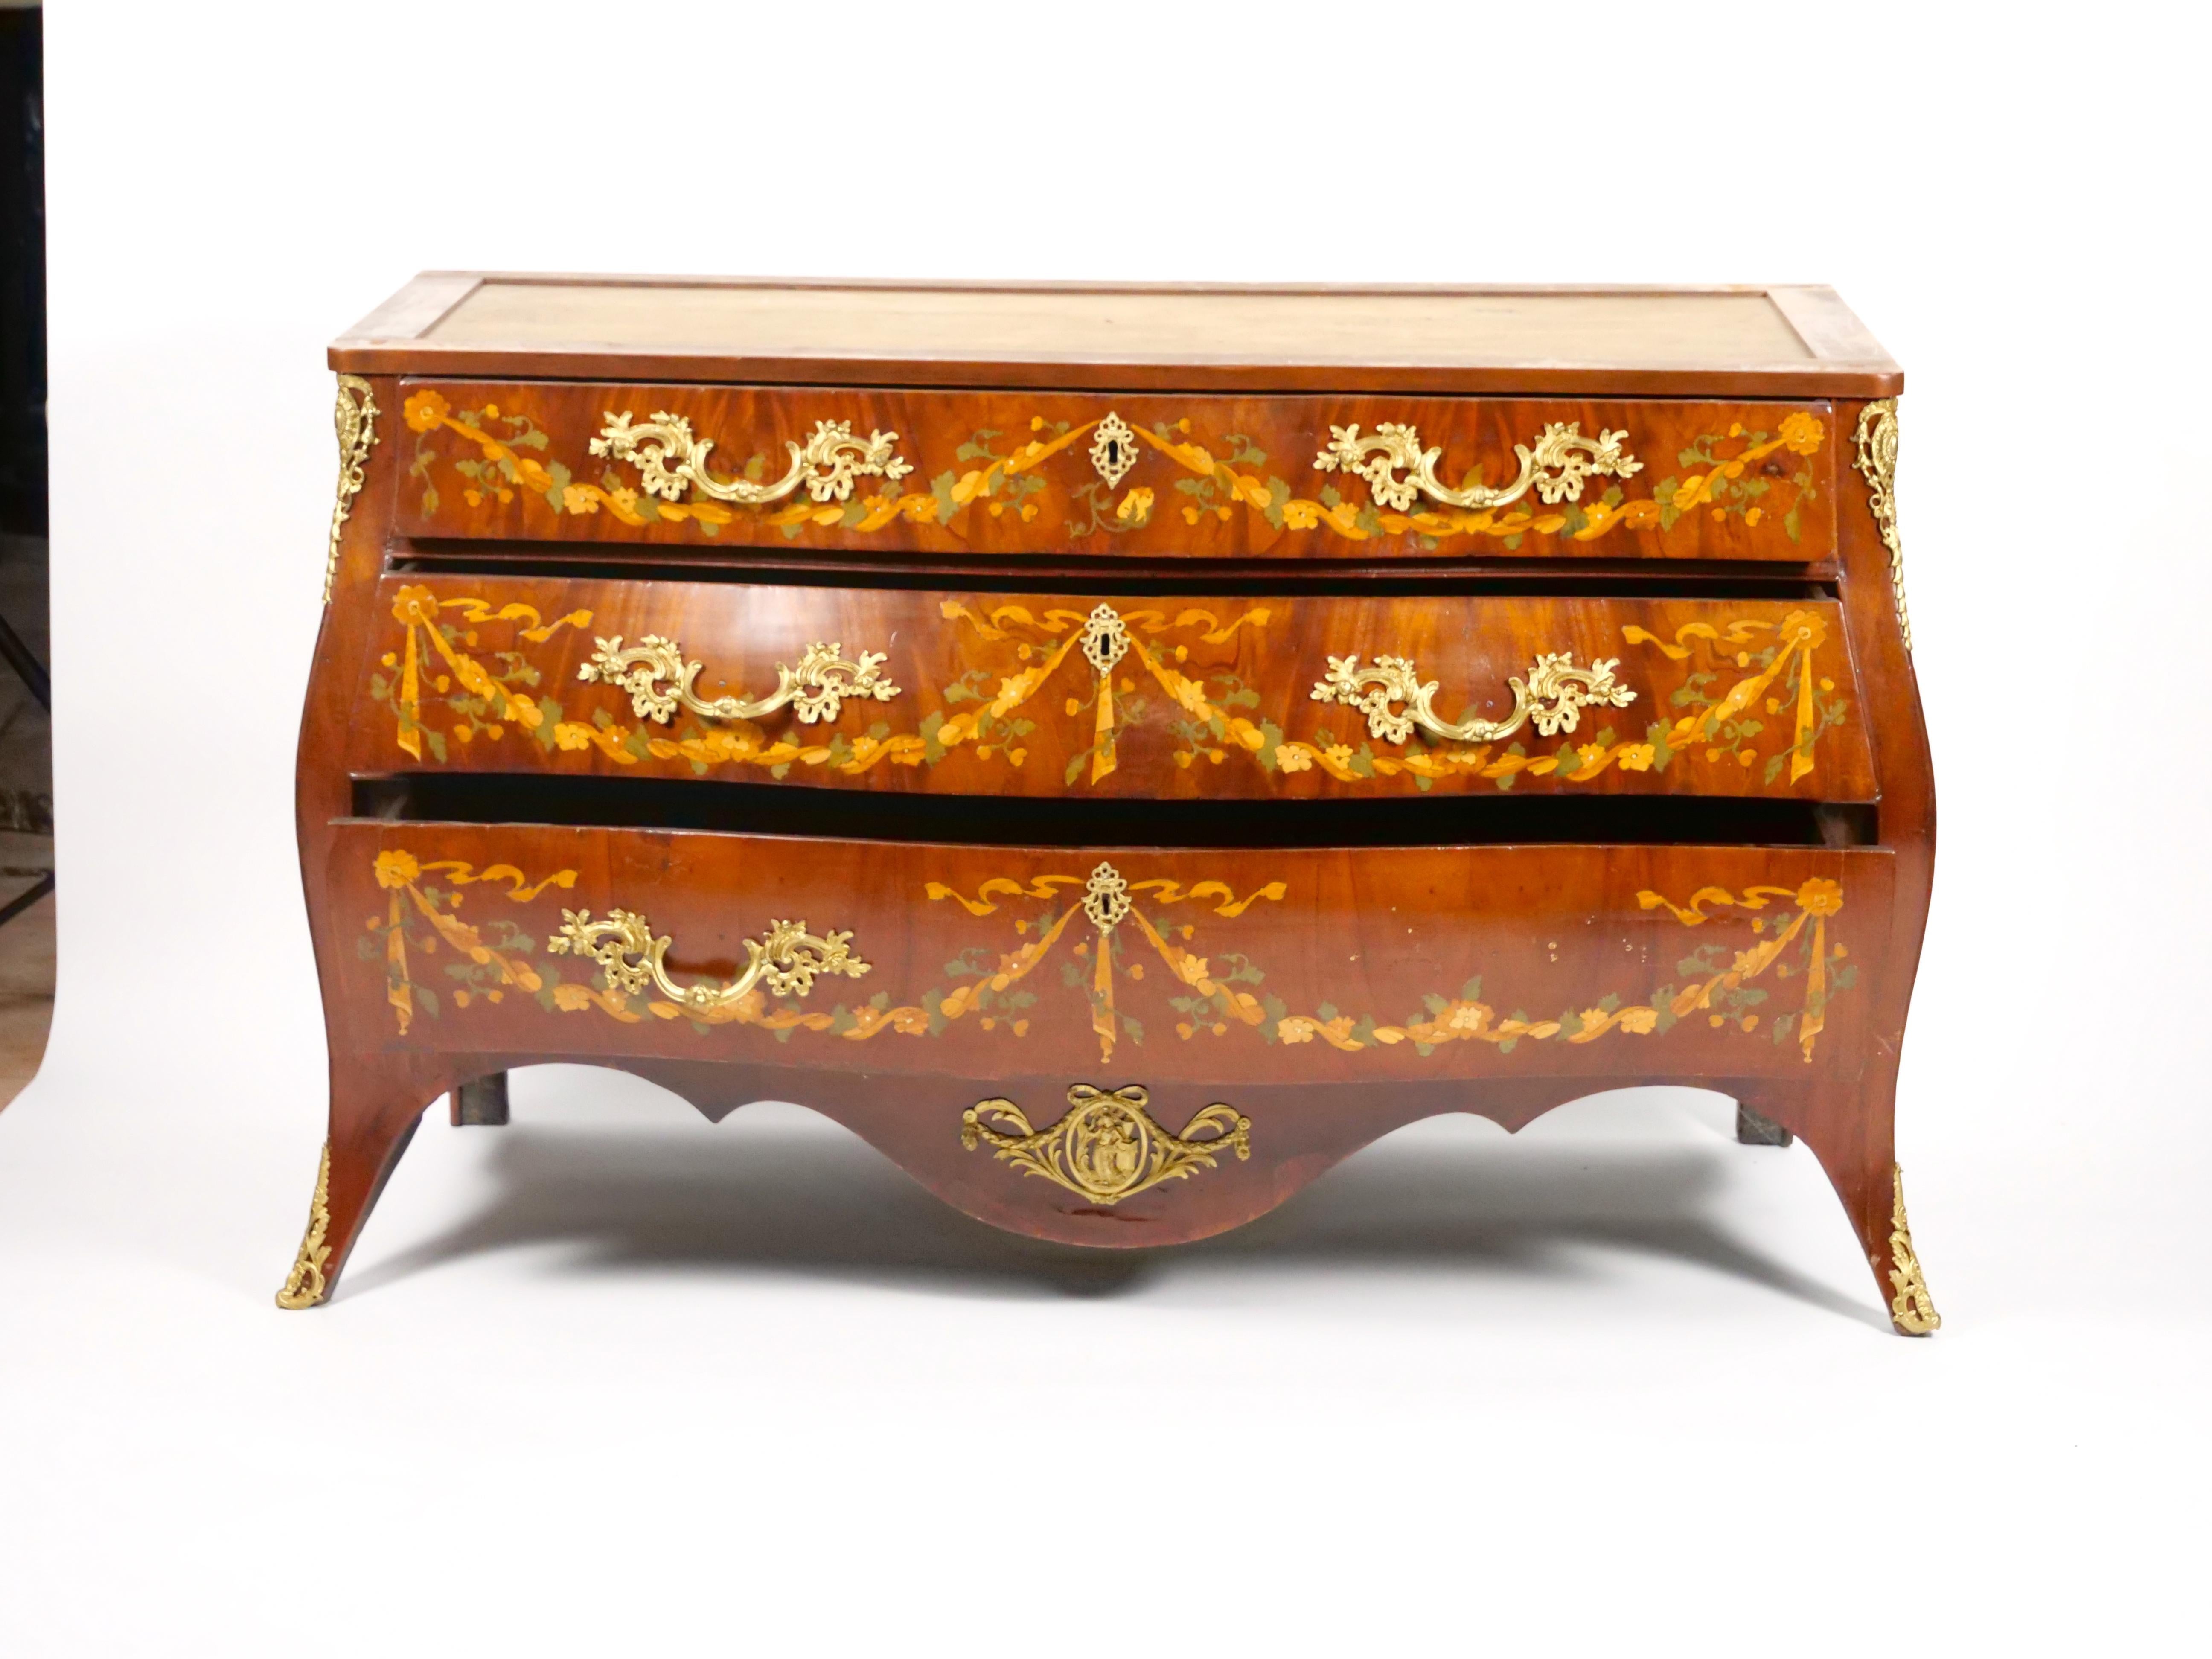 Antique Marble Top Floral Marquetry Inlaid Mahogany Commode / Credenza For Sale 4